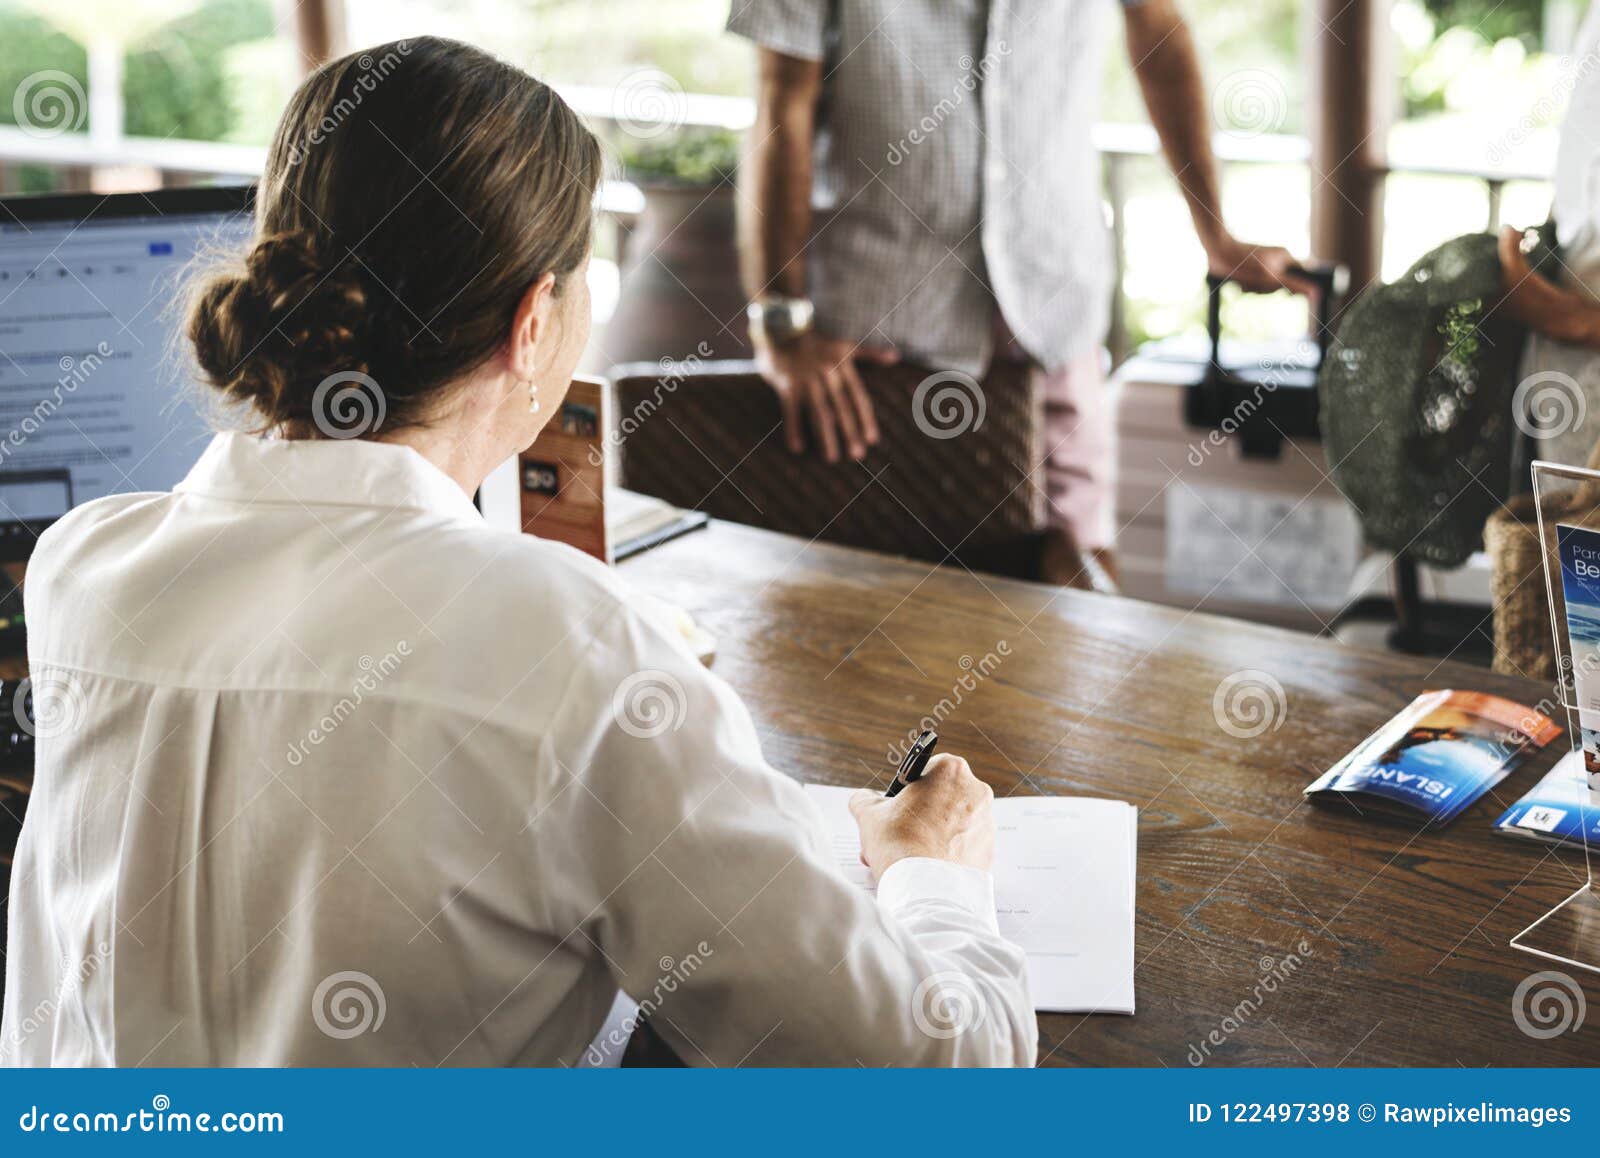 Receptionist Working At The Front Desk Stock Photo Image Of